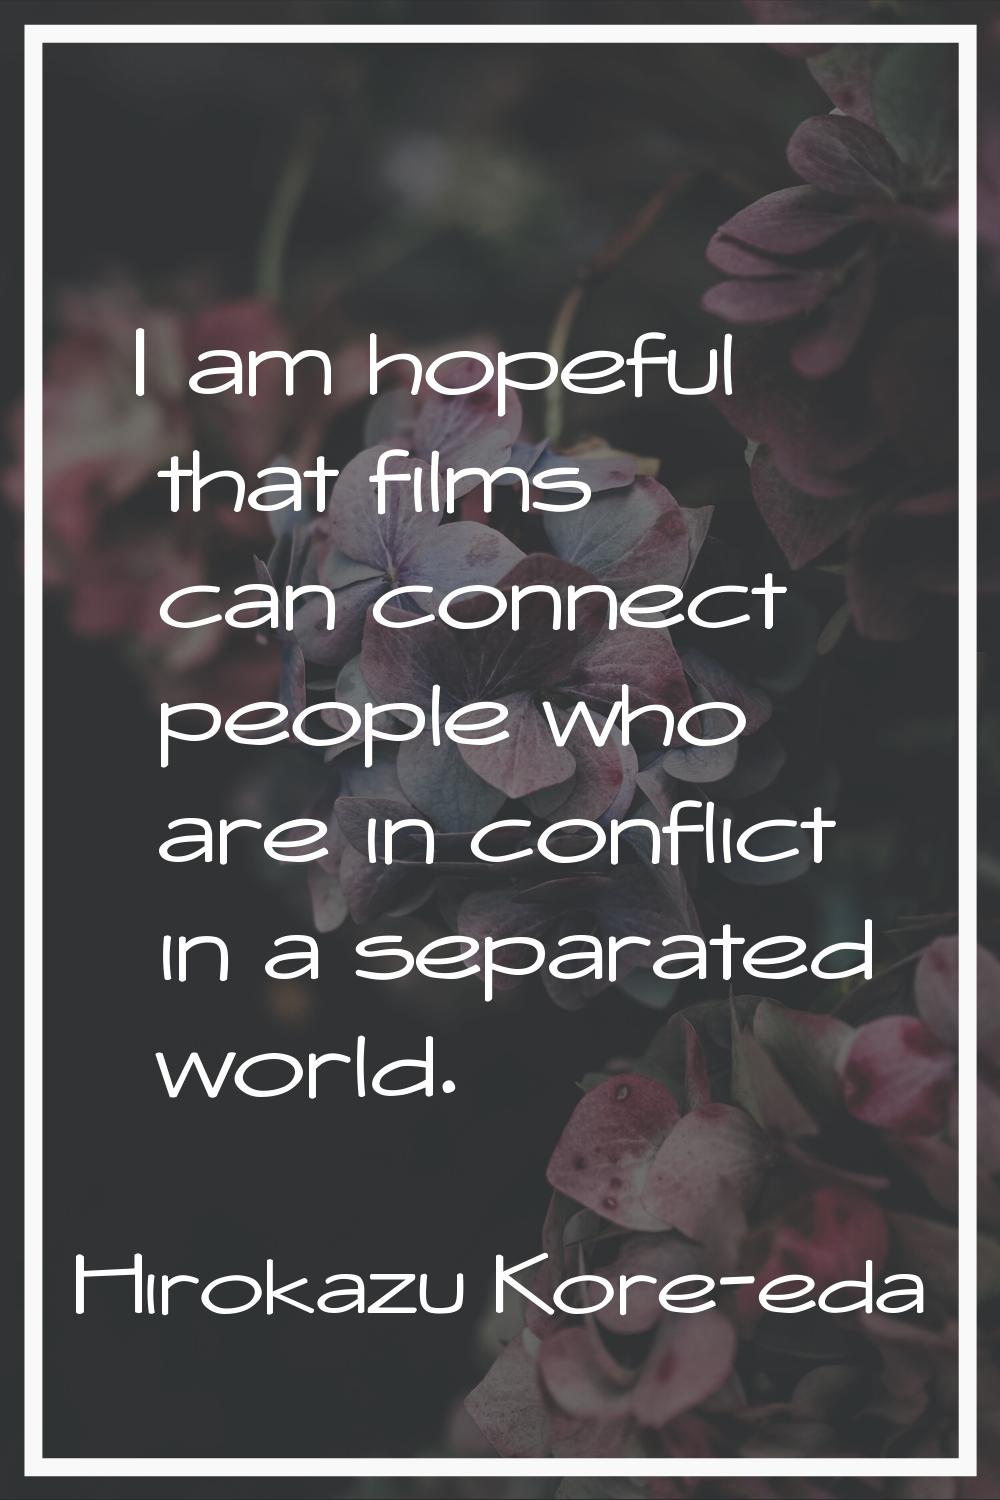 I am hopeful that films can connect people who are in conflict in a separated world.